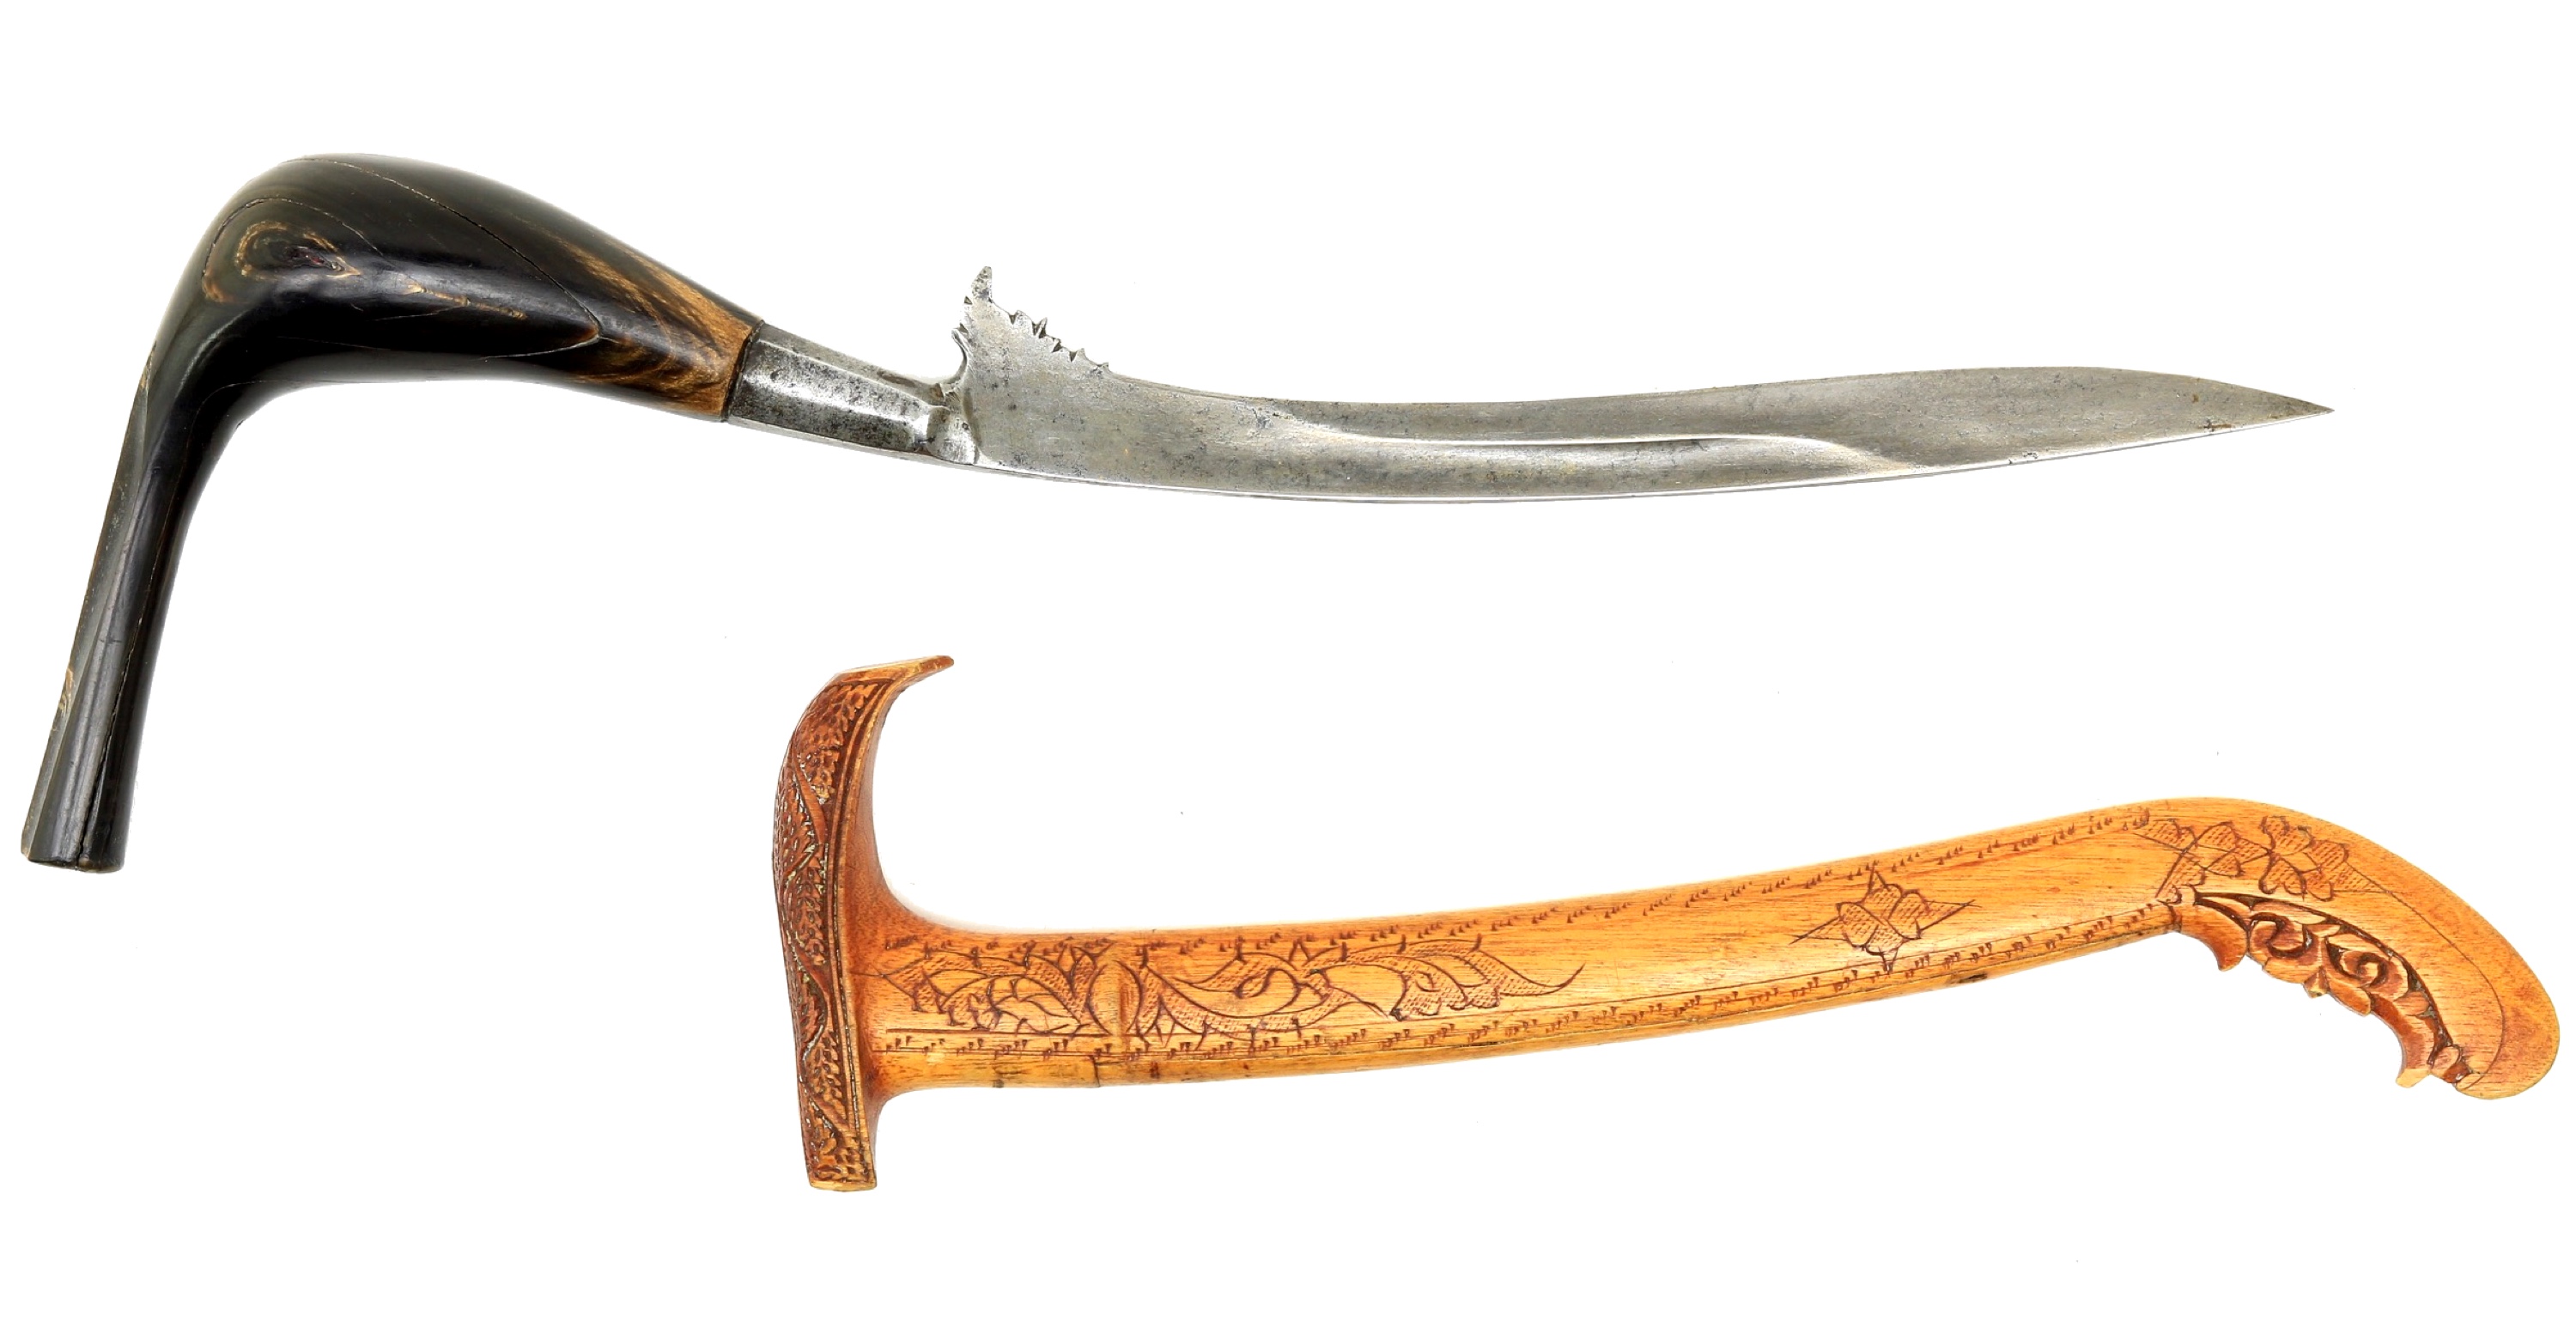 A rencong dagger from Aceh